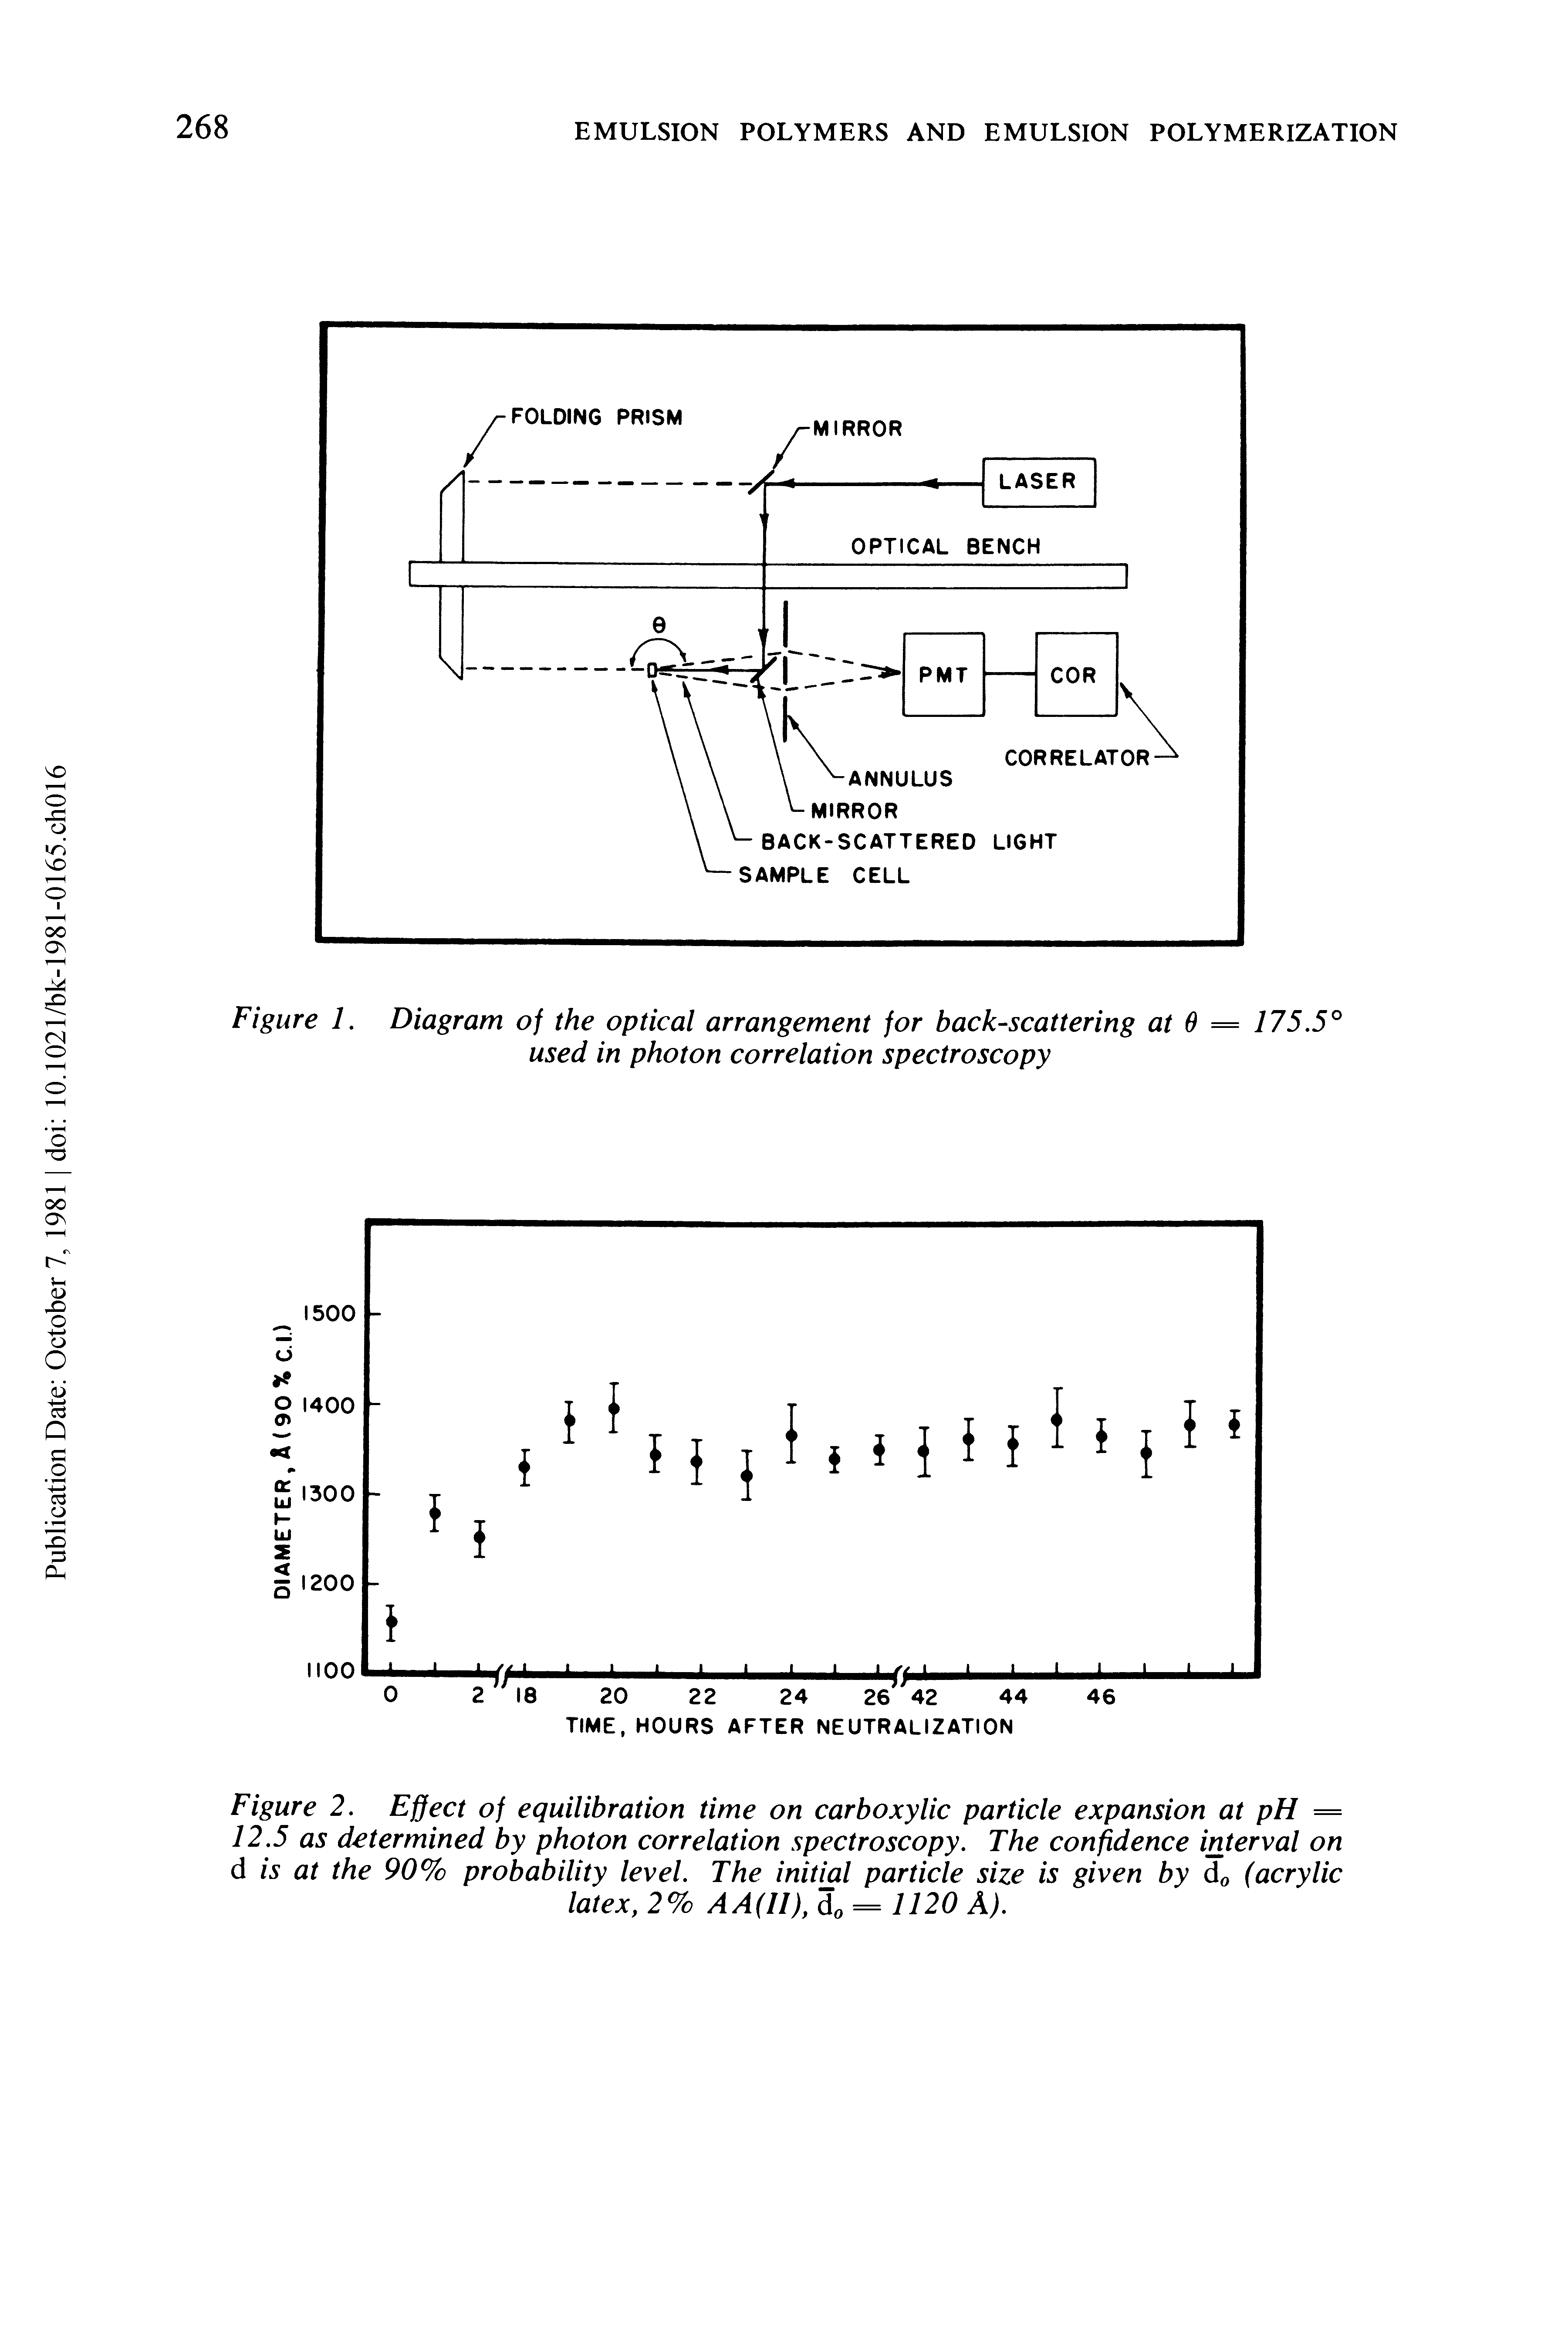 Figure 2. Effect of equilibration time on carboxylic particle expansion at pH = 12.5 as determined by photon correlation spectroscopy. The confidence interval on d is at the 90% probability level. The initial particle size is given by d0 (acrylic latex, 2% AA(ll), d0 = 1120 A).